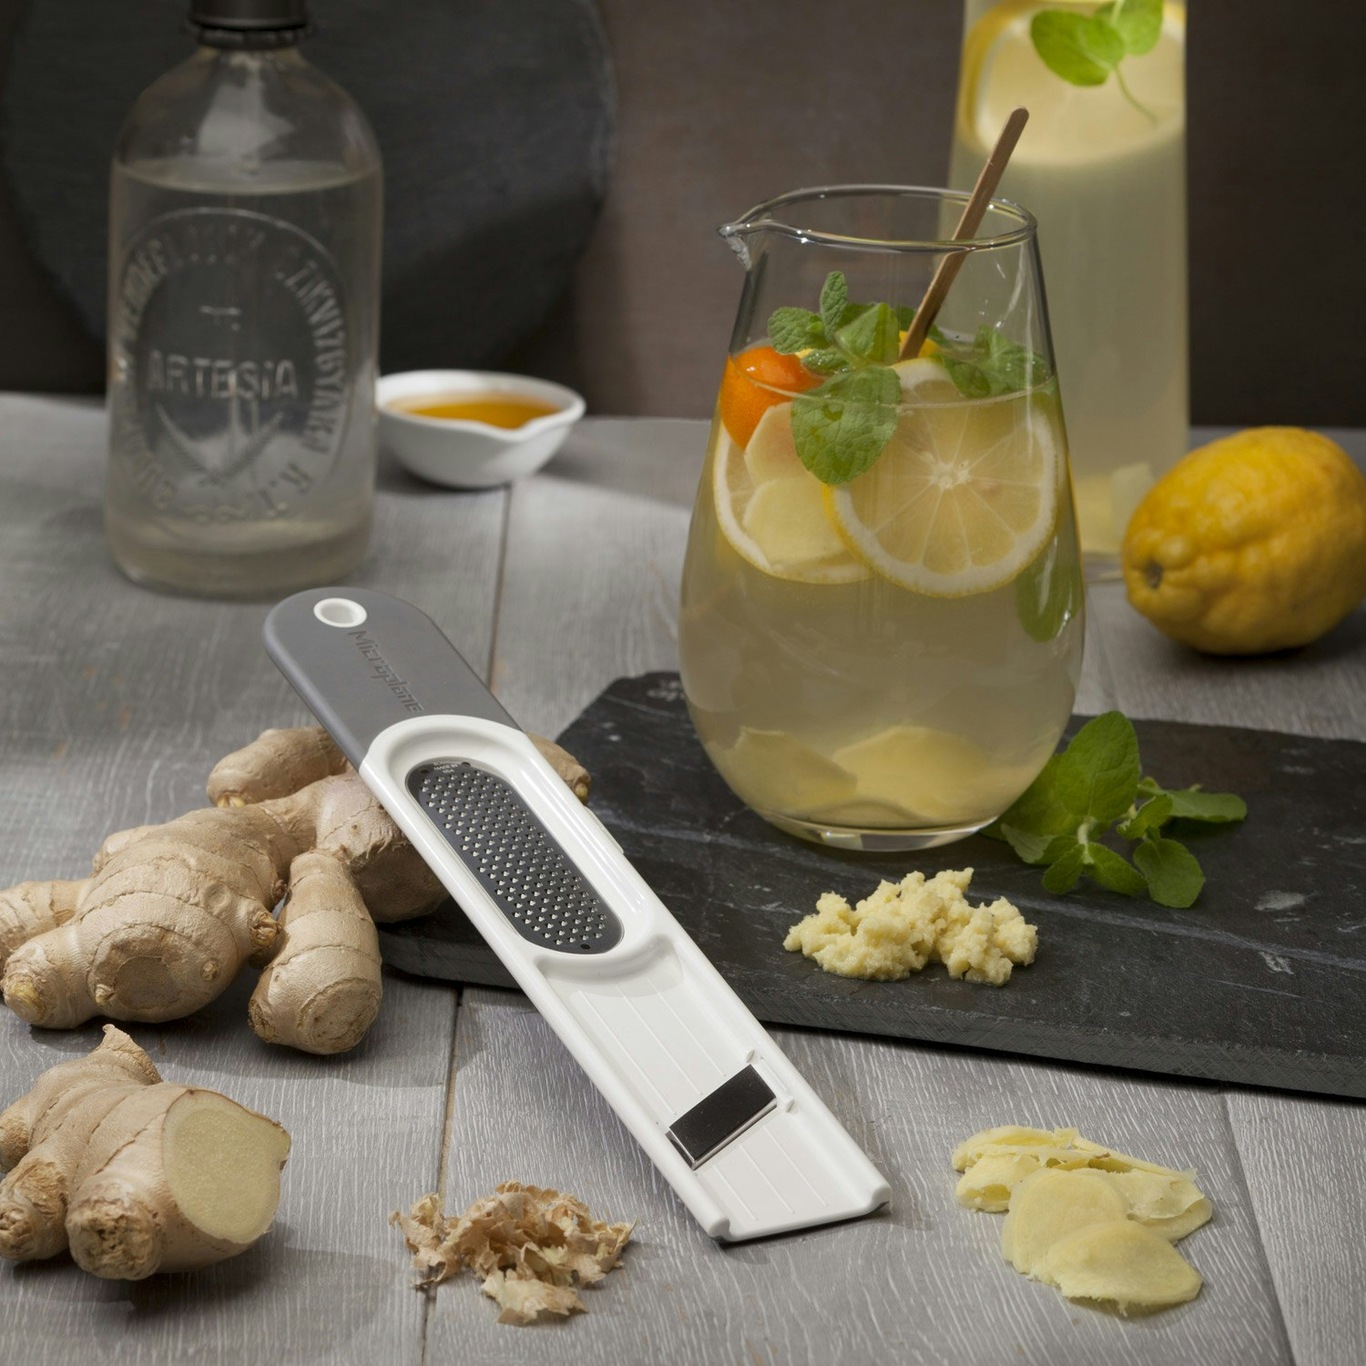 https://royaldesign.com/image/2/microplane-grater-ginger-3-in-1-1?w=800&quality=80